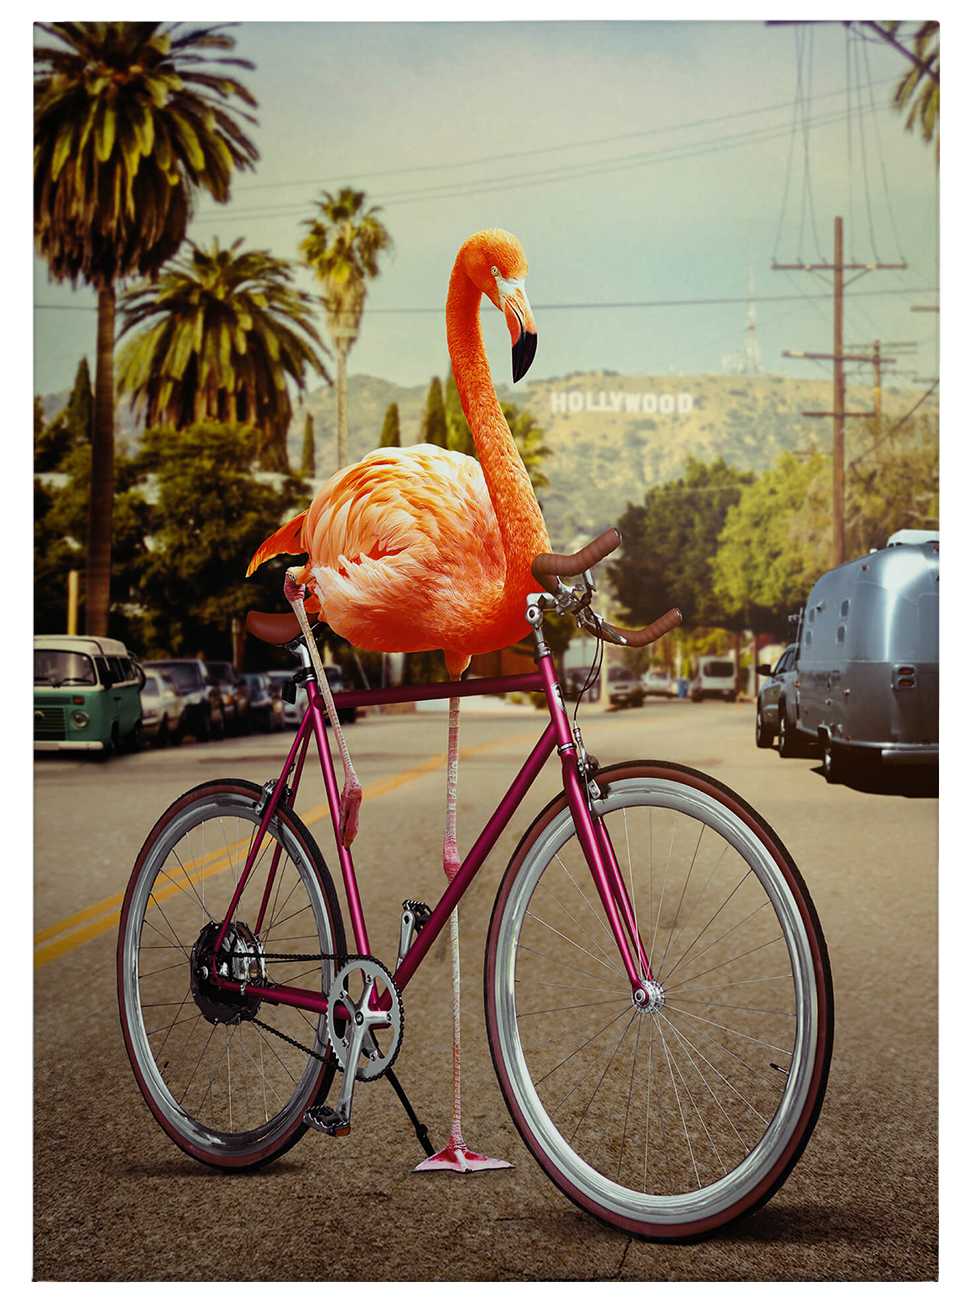             Canvas print flamingo on a bicycle by Loose – rosa
        